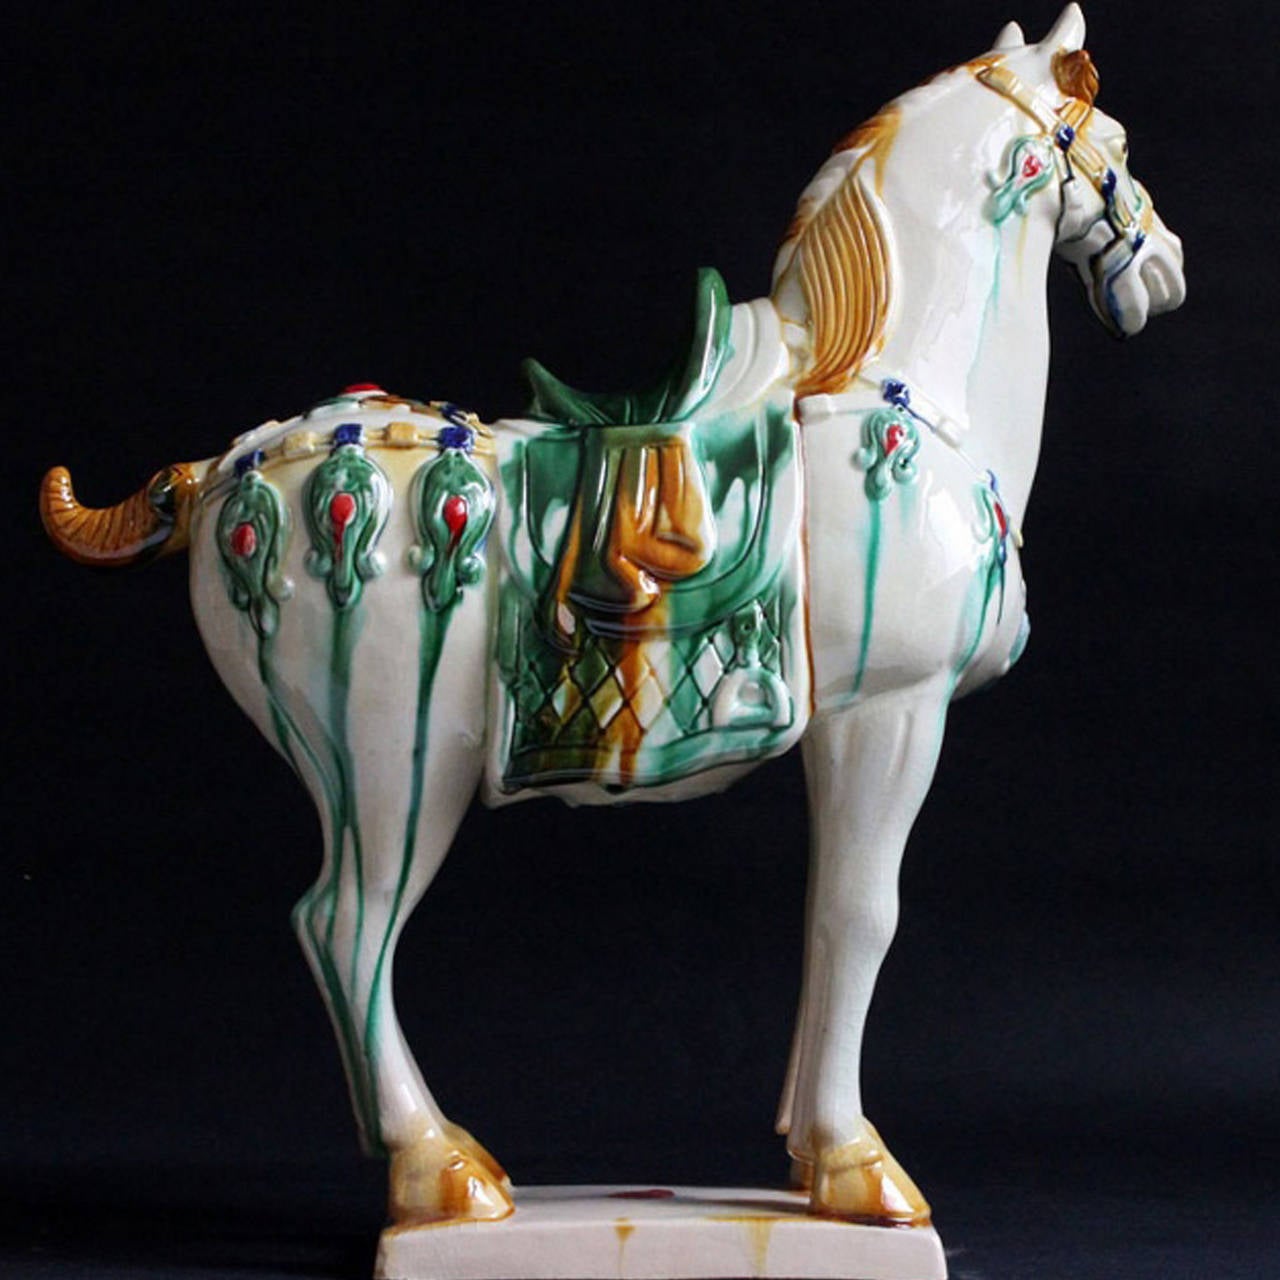 Beautiful terracotta horse is hand made and painted using the ancient Tri-Glaze techniques. A true work of art, the splendid glossy glaze is distinctive of Tang San Cai style. Glaze is skillfully applied achieving high artistic effect. Horse's vivid